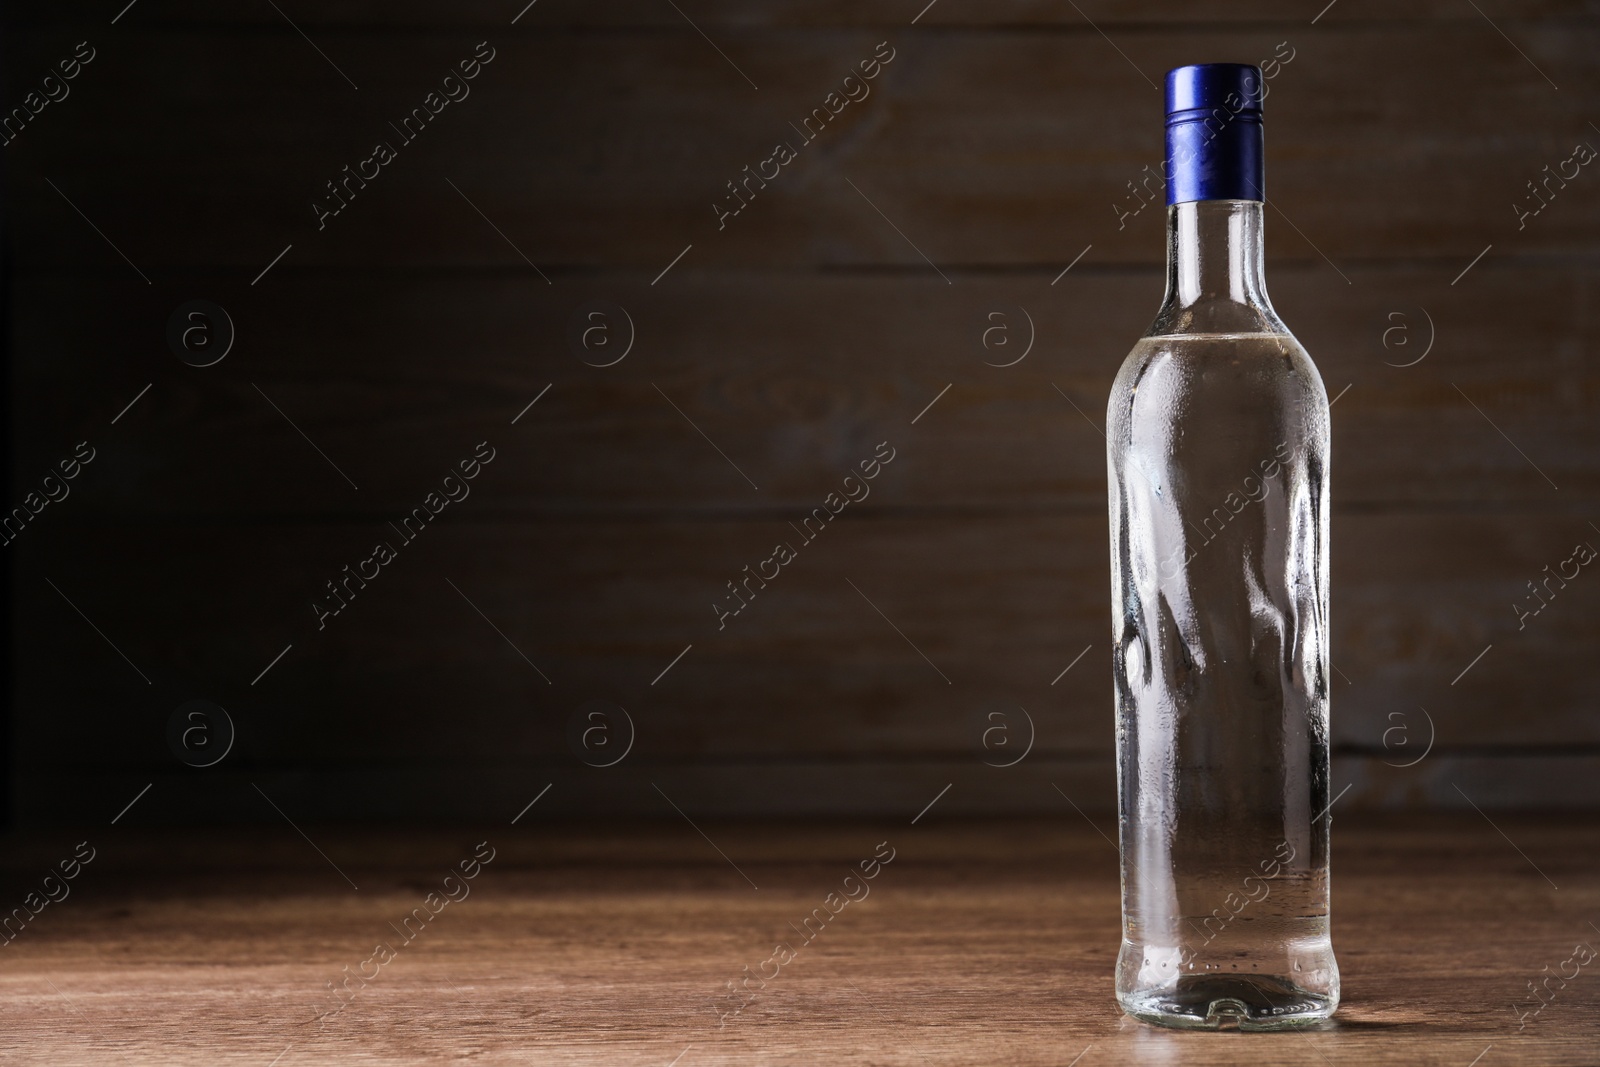 Photo of Bottle of vodka on table against wooden background. Space for text